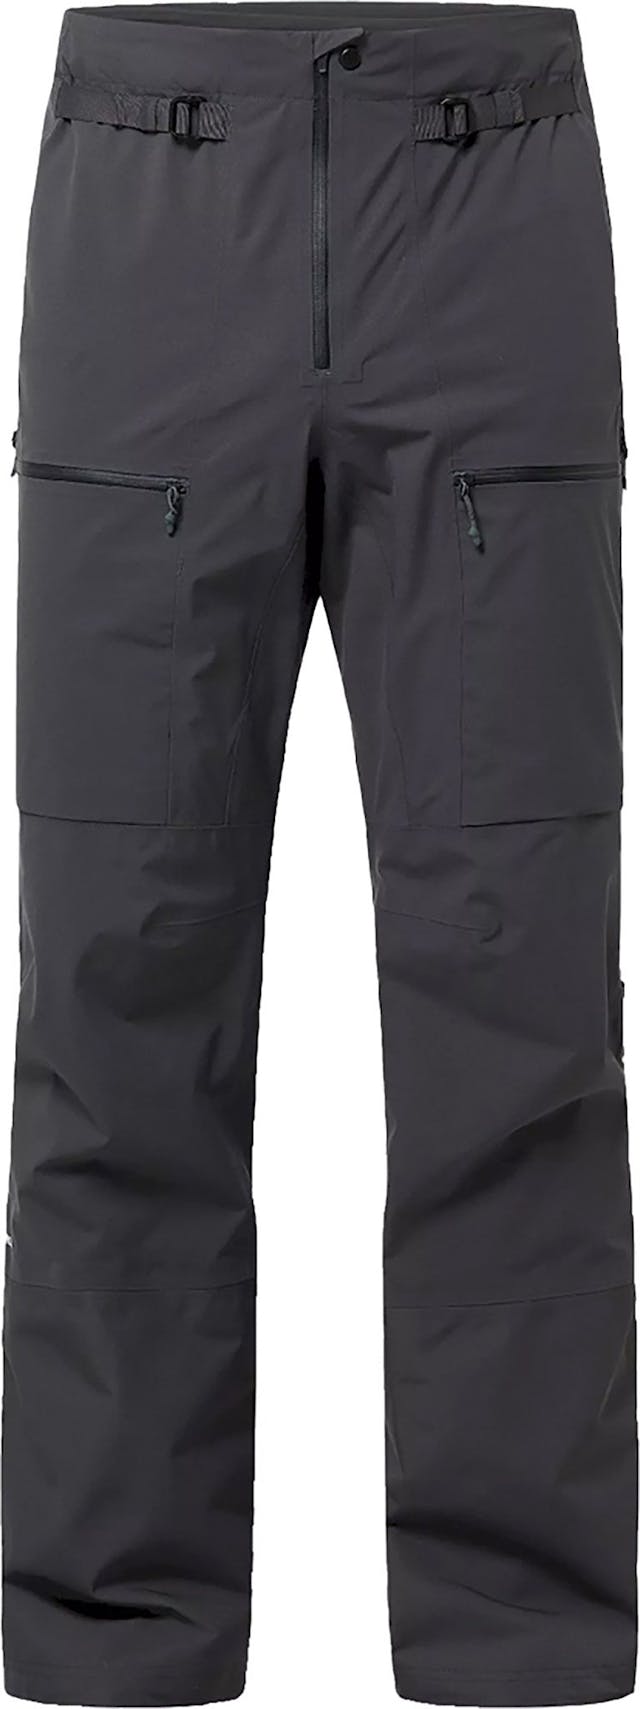 Product image for L.I.M Touring Proof Pant - Men's